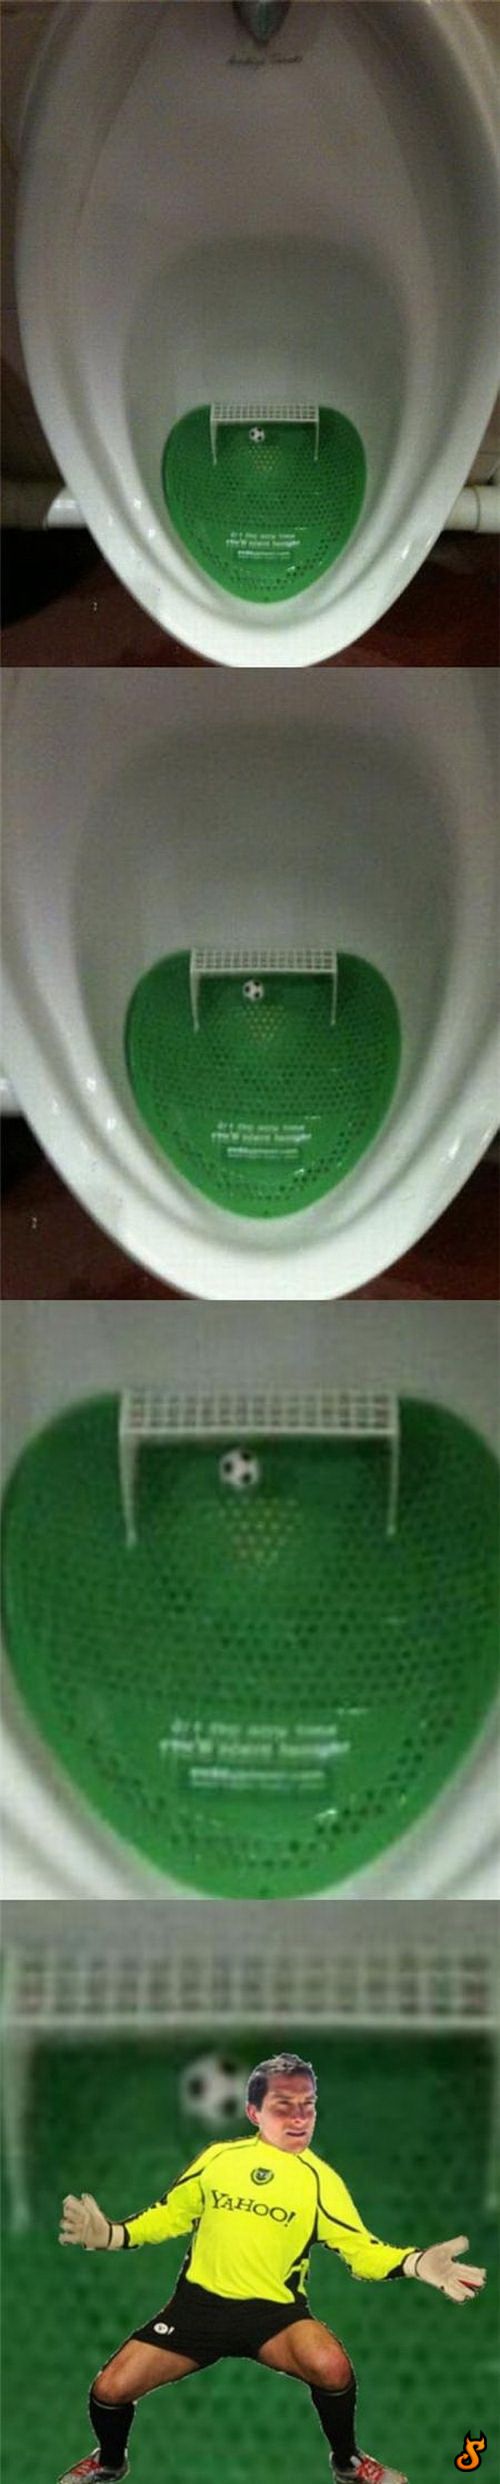 play football in your toilets